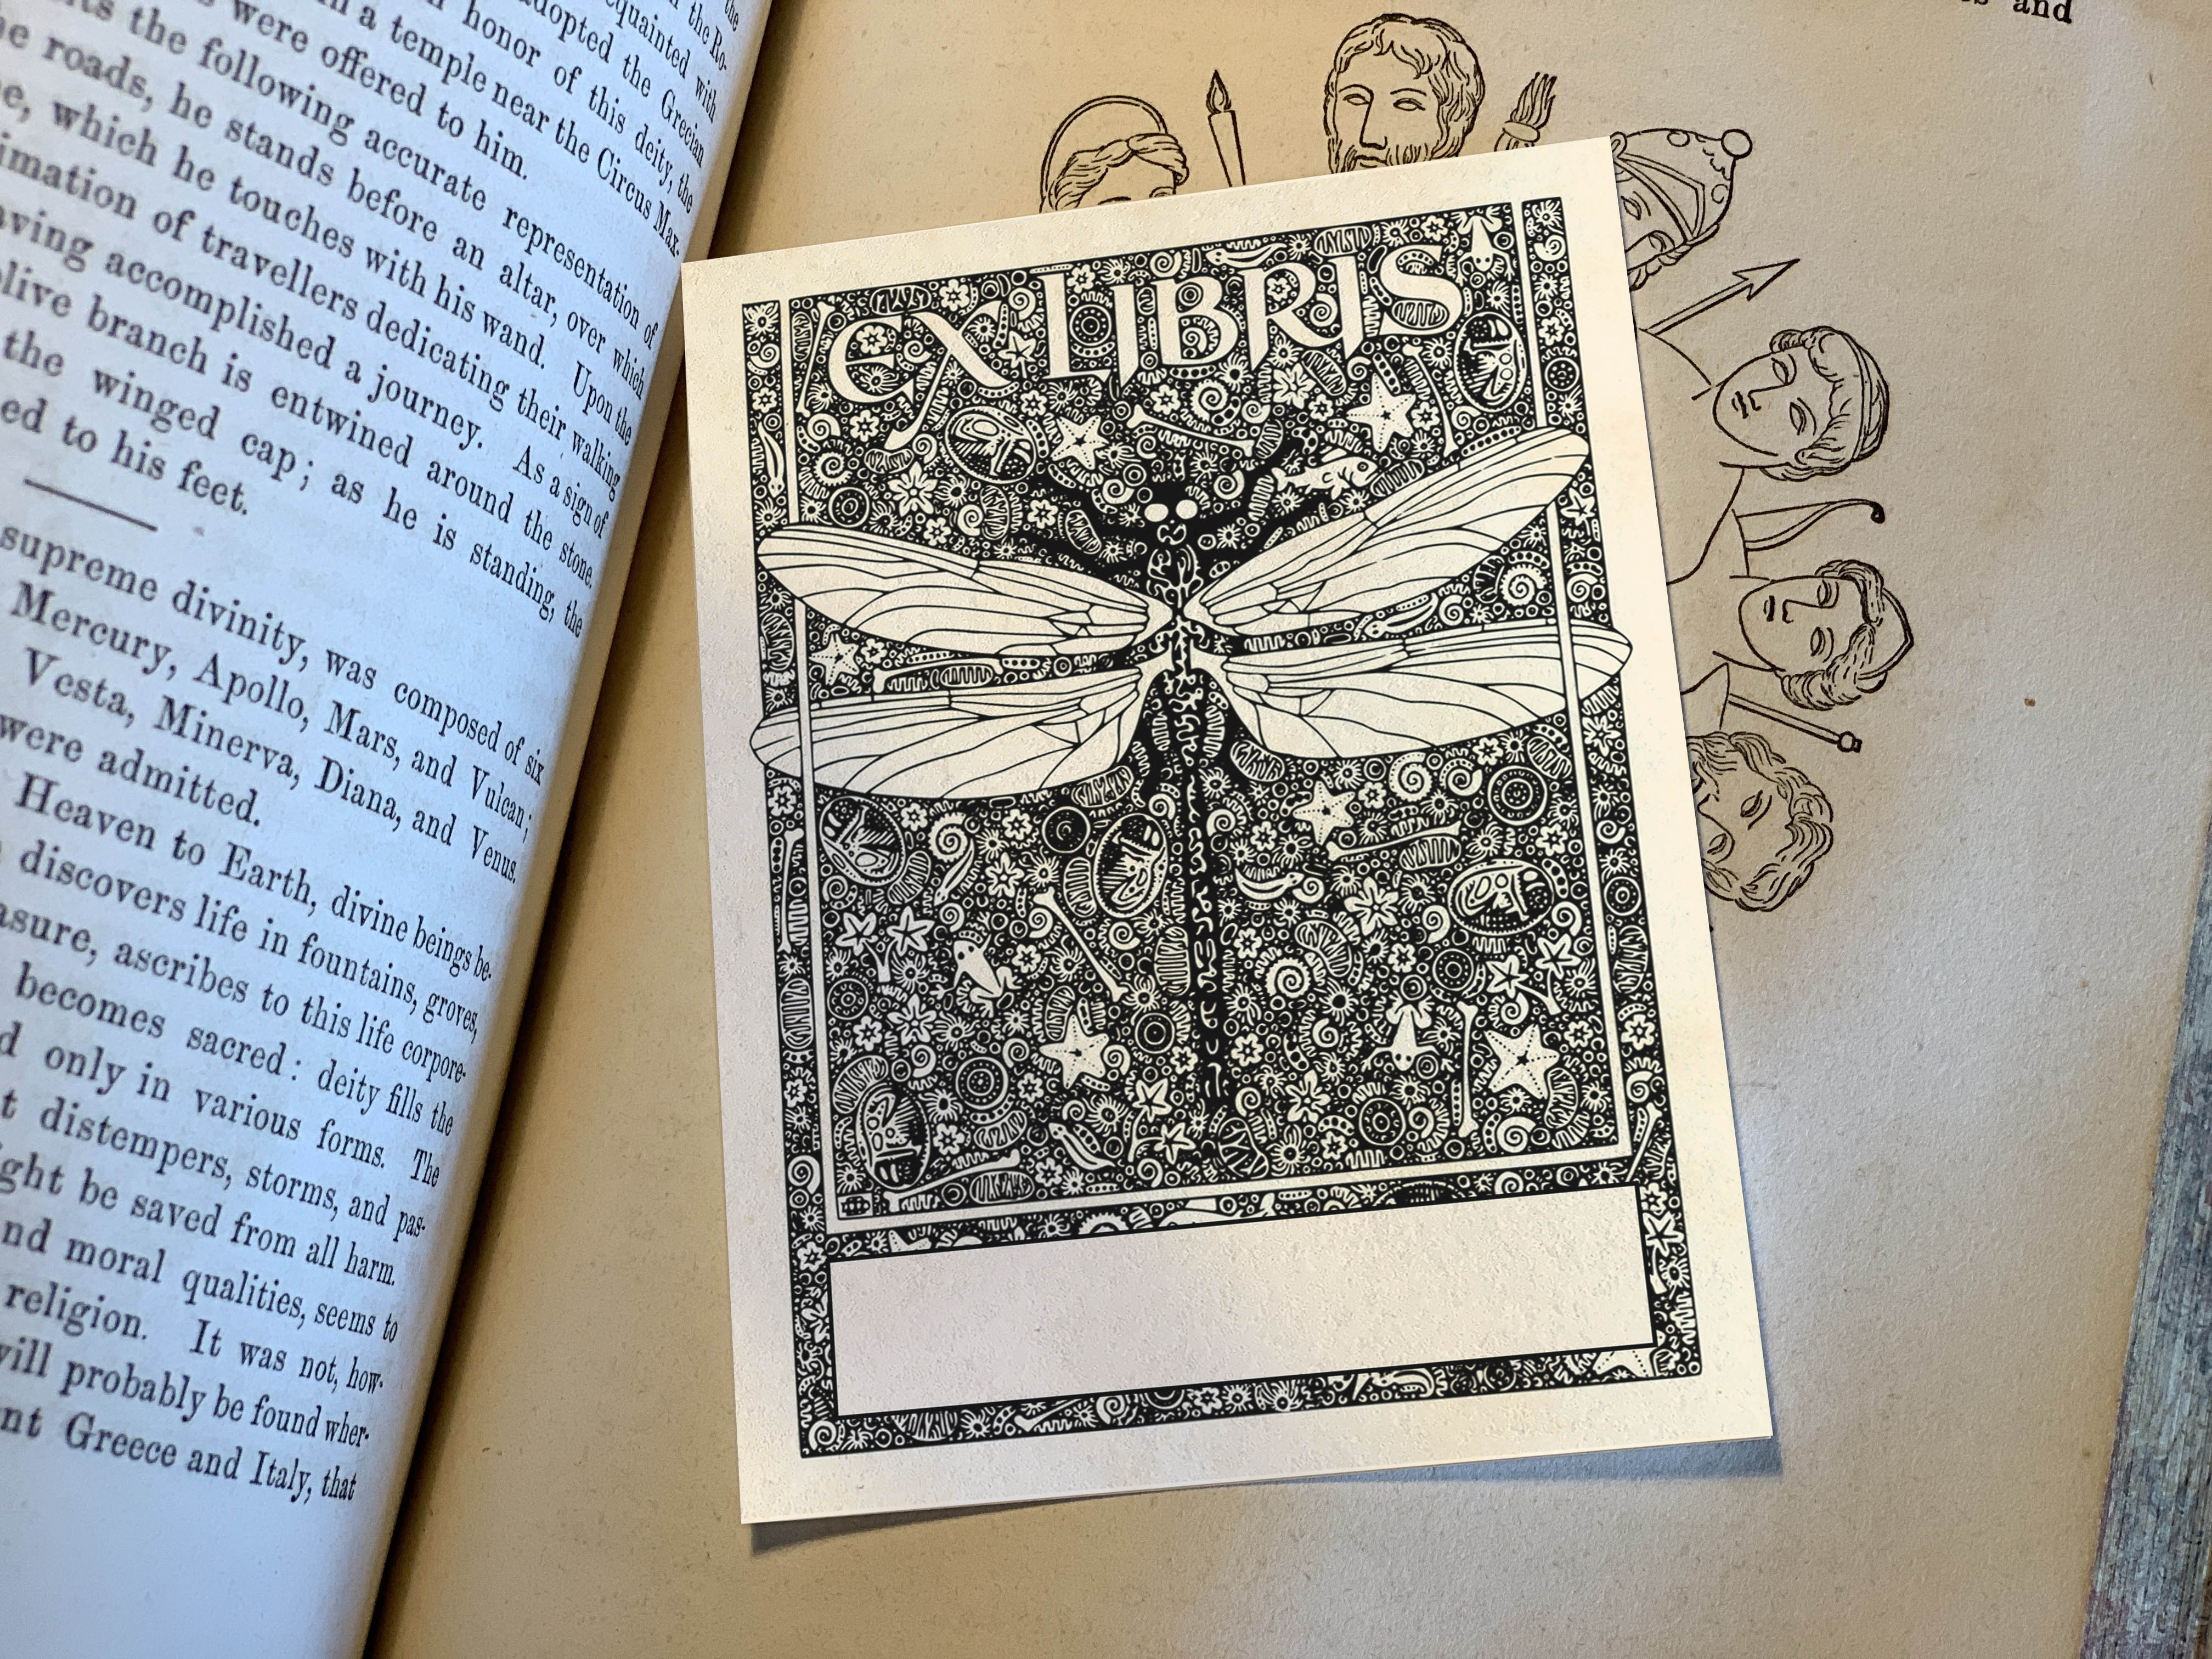 Dragonfly, Personalized Ex-Libris Bookplates, Crafted on Traditional Gummed Paper, 3in x 4in, Set of 30